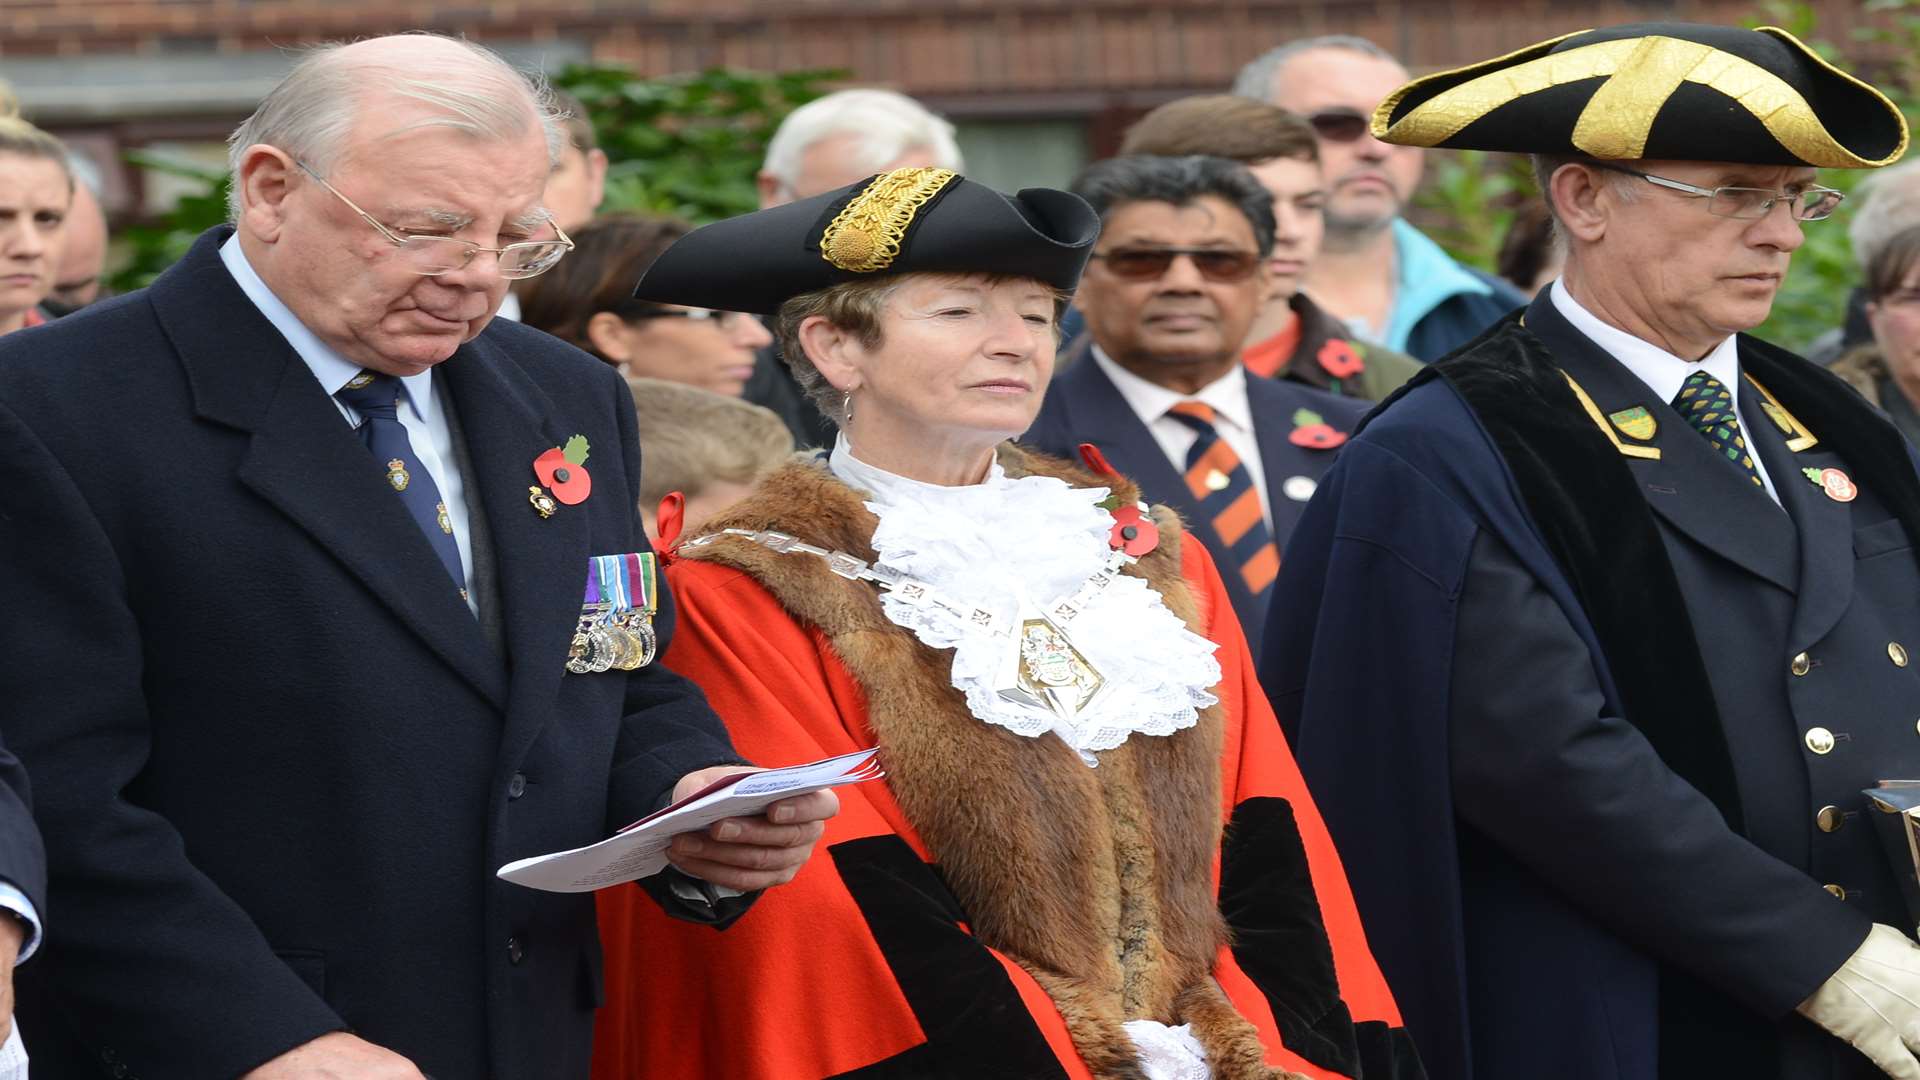 The Mayor of Ashford, Cllr Geraldine Dyer, at the Remembrance Sunday service